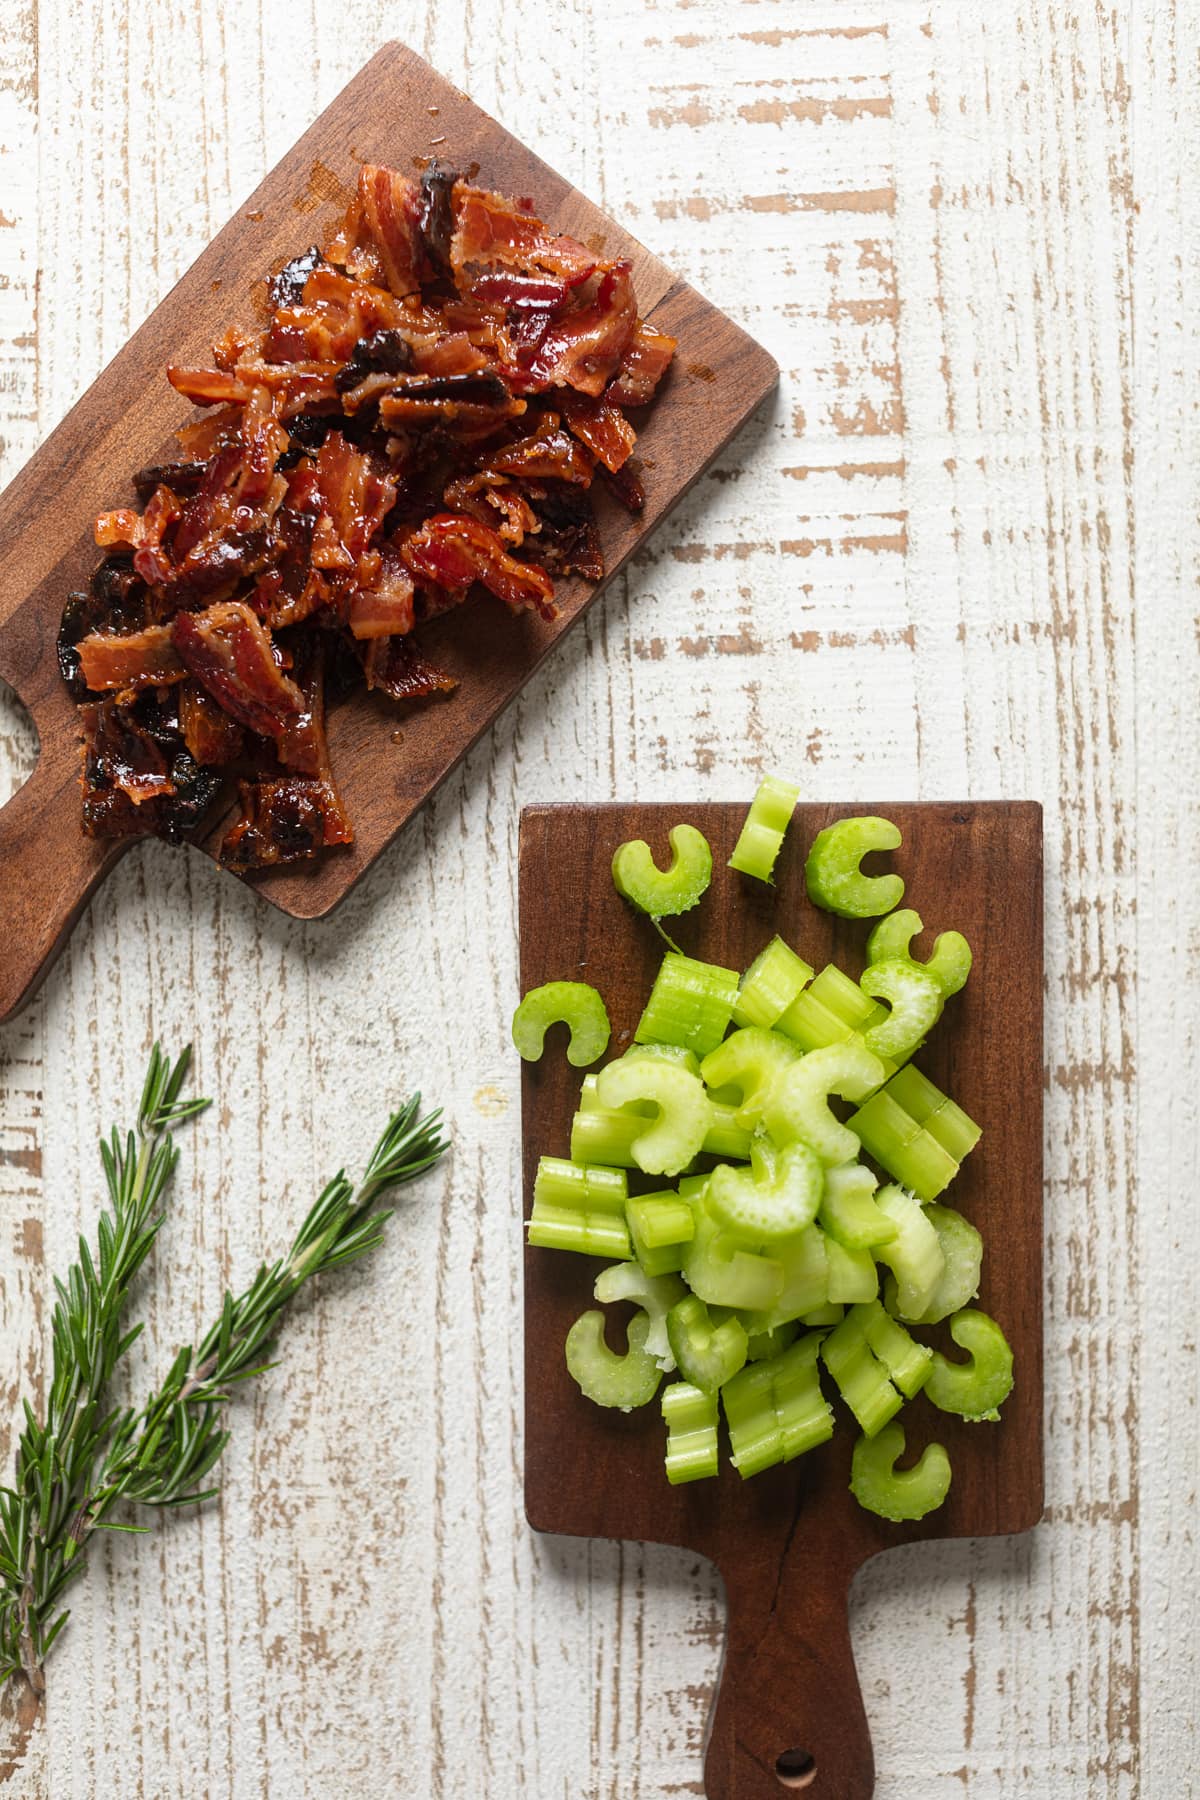 Chopped bacon and celery on wooden boards